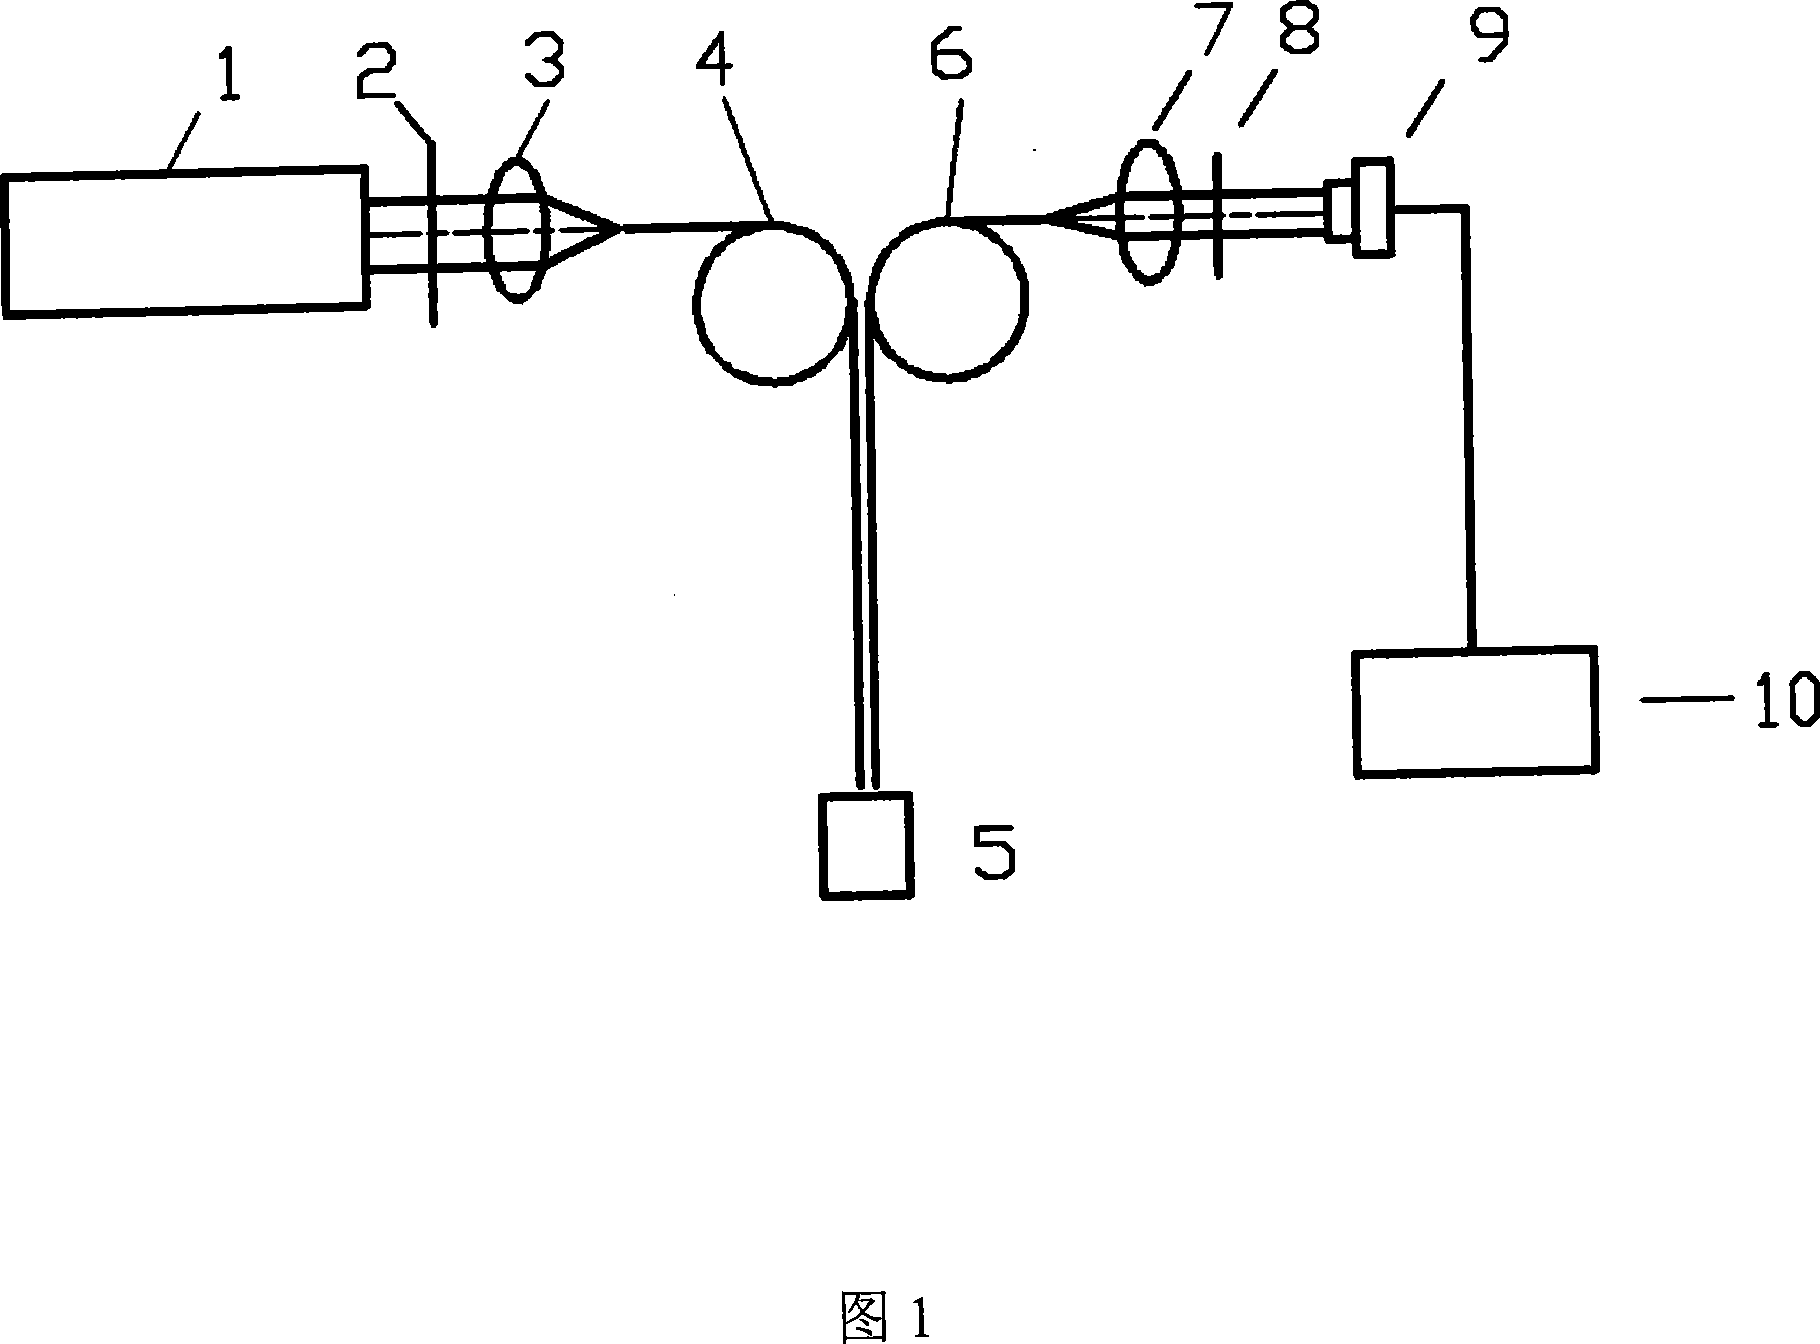 Rotary type multichannel fluorescence excitation apparatus and method based on input-output optical fiber